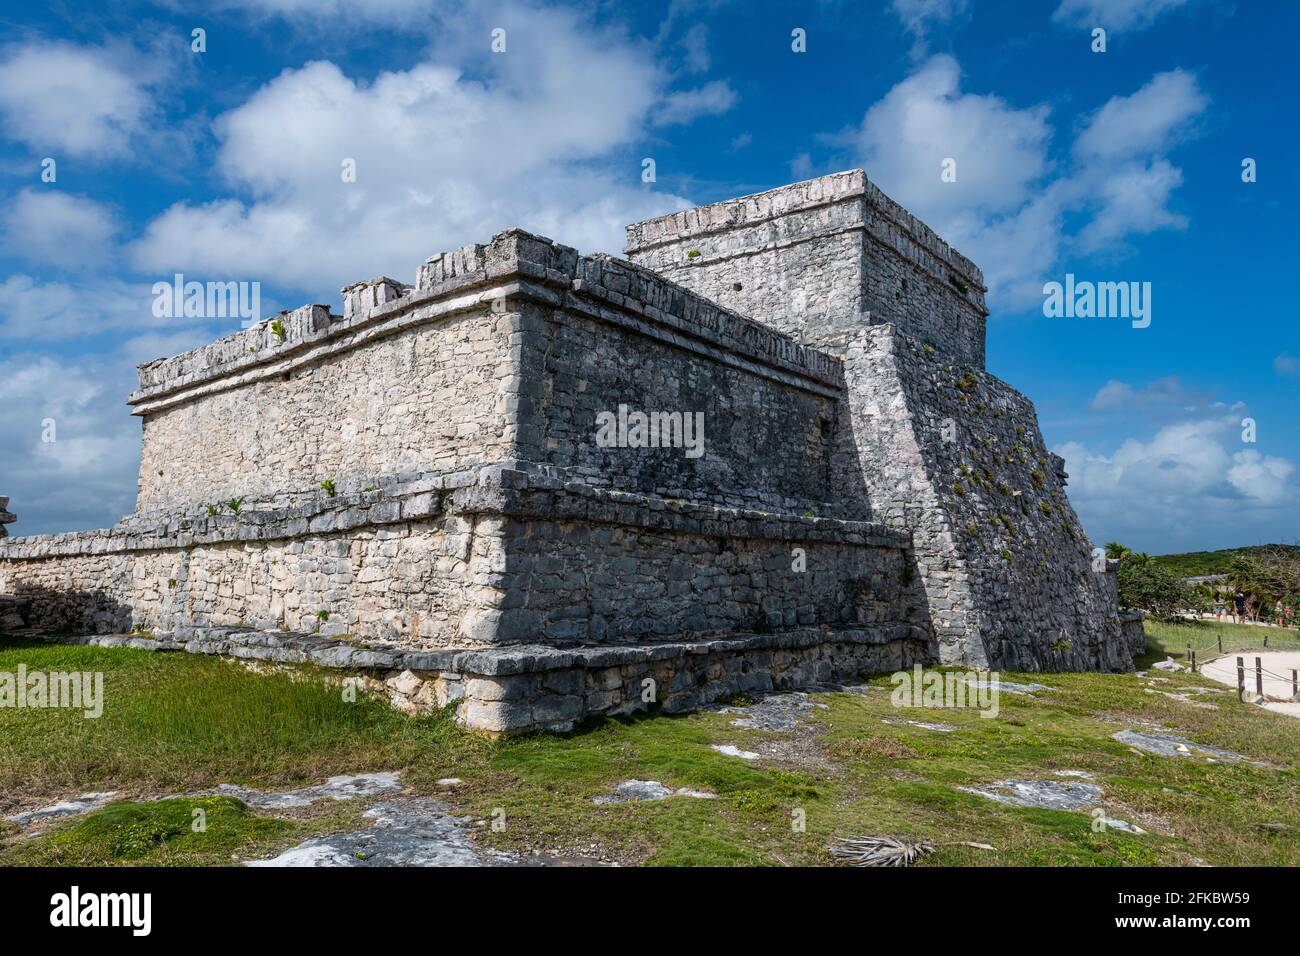 Pre-Columbian Mayan walled city of Tulum, Quintana Roo, Mexico, North America Stock Photo